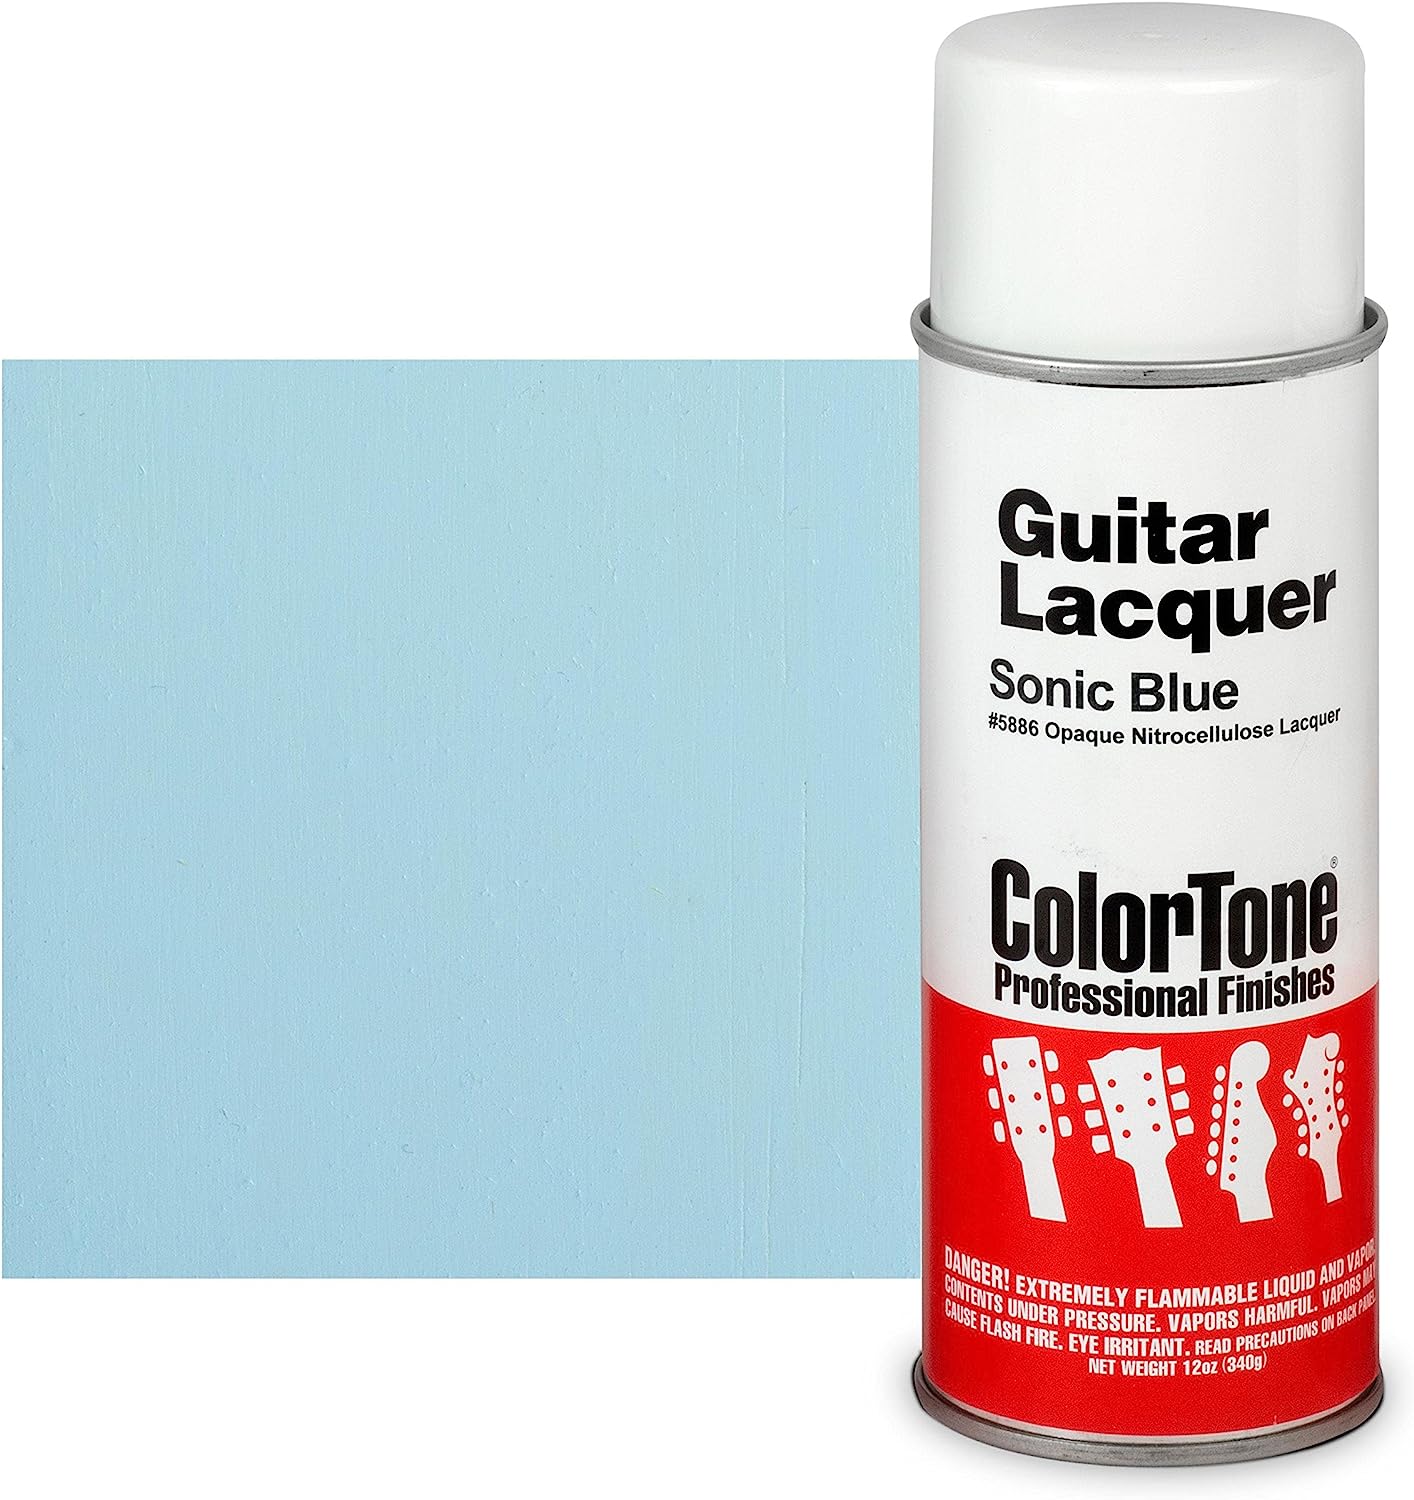 spray paint for guitar product comparison